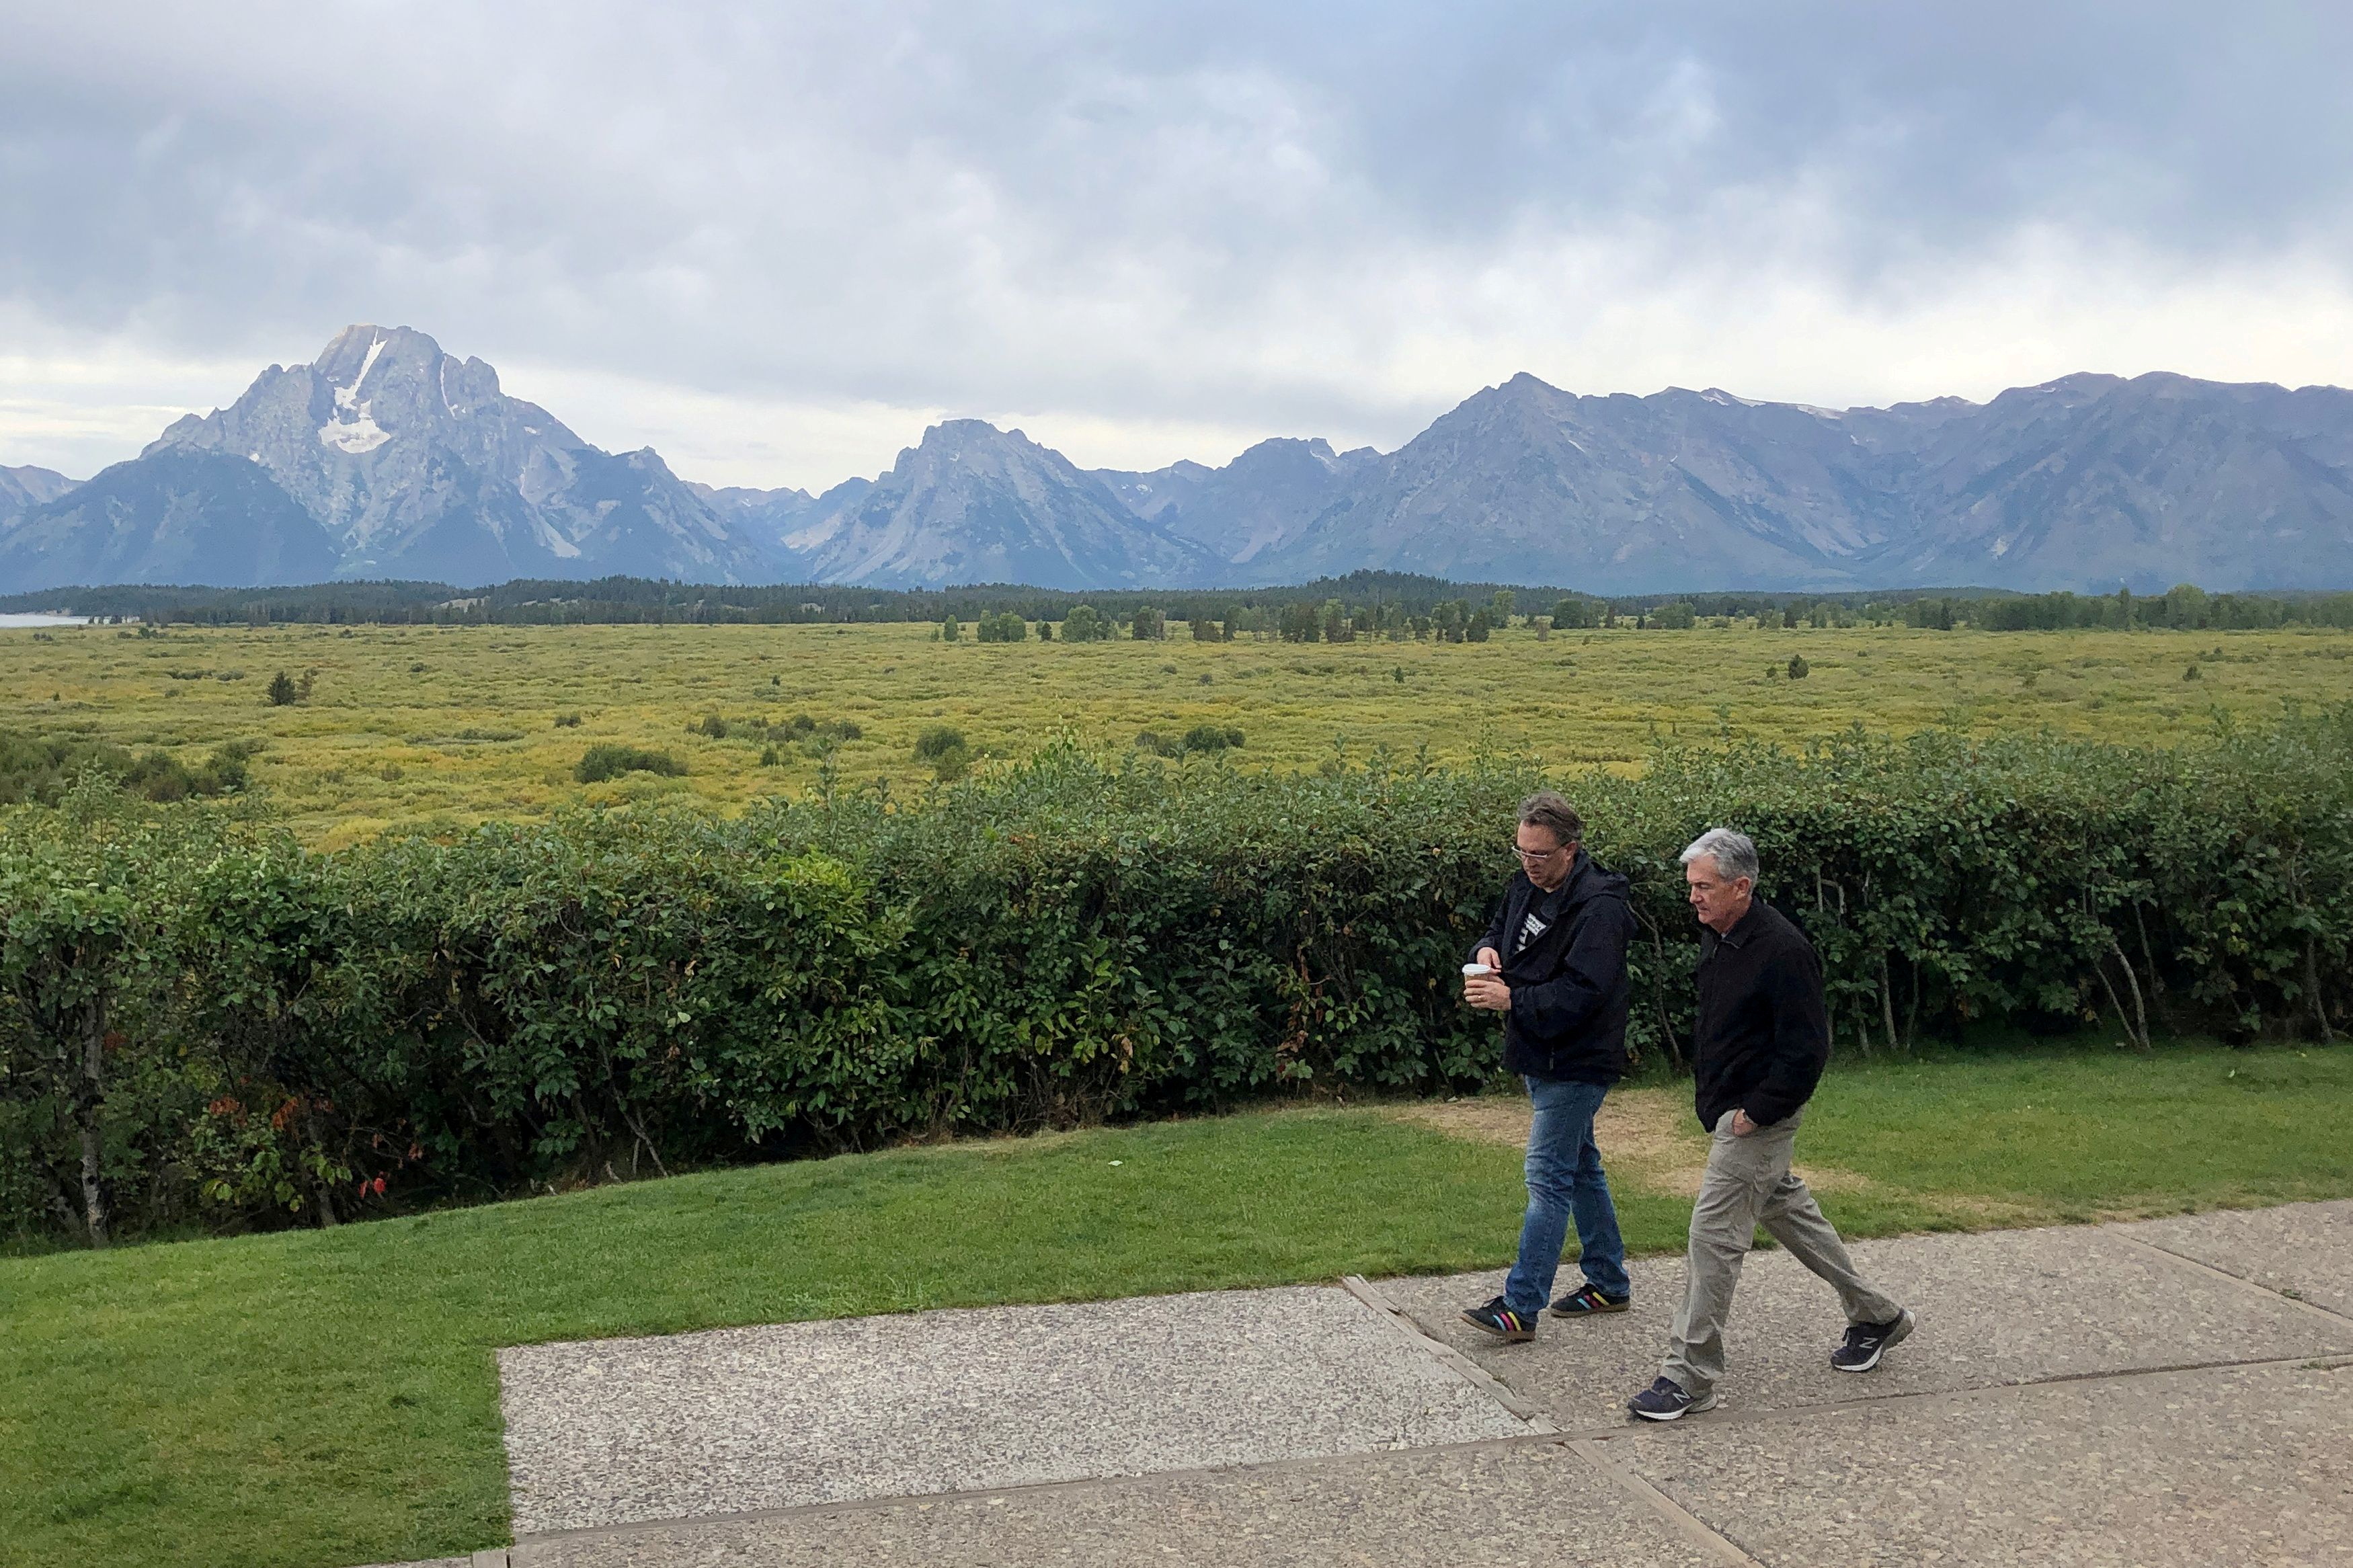 Federal Reserve Chair Jerome Powell and New York Federal Reserve President John Williams walk together in Jackson Hole